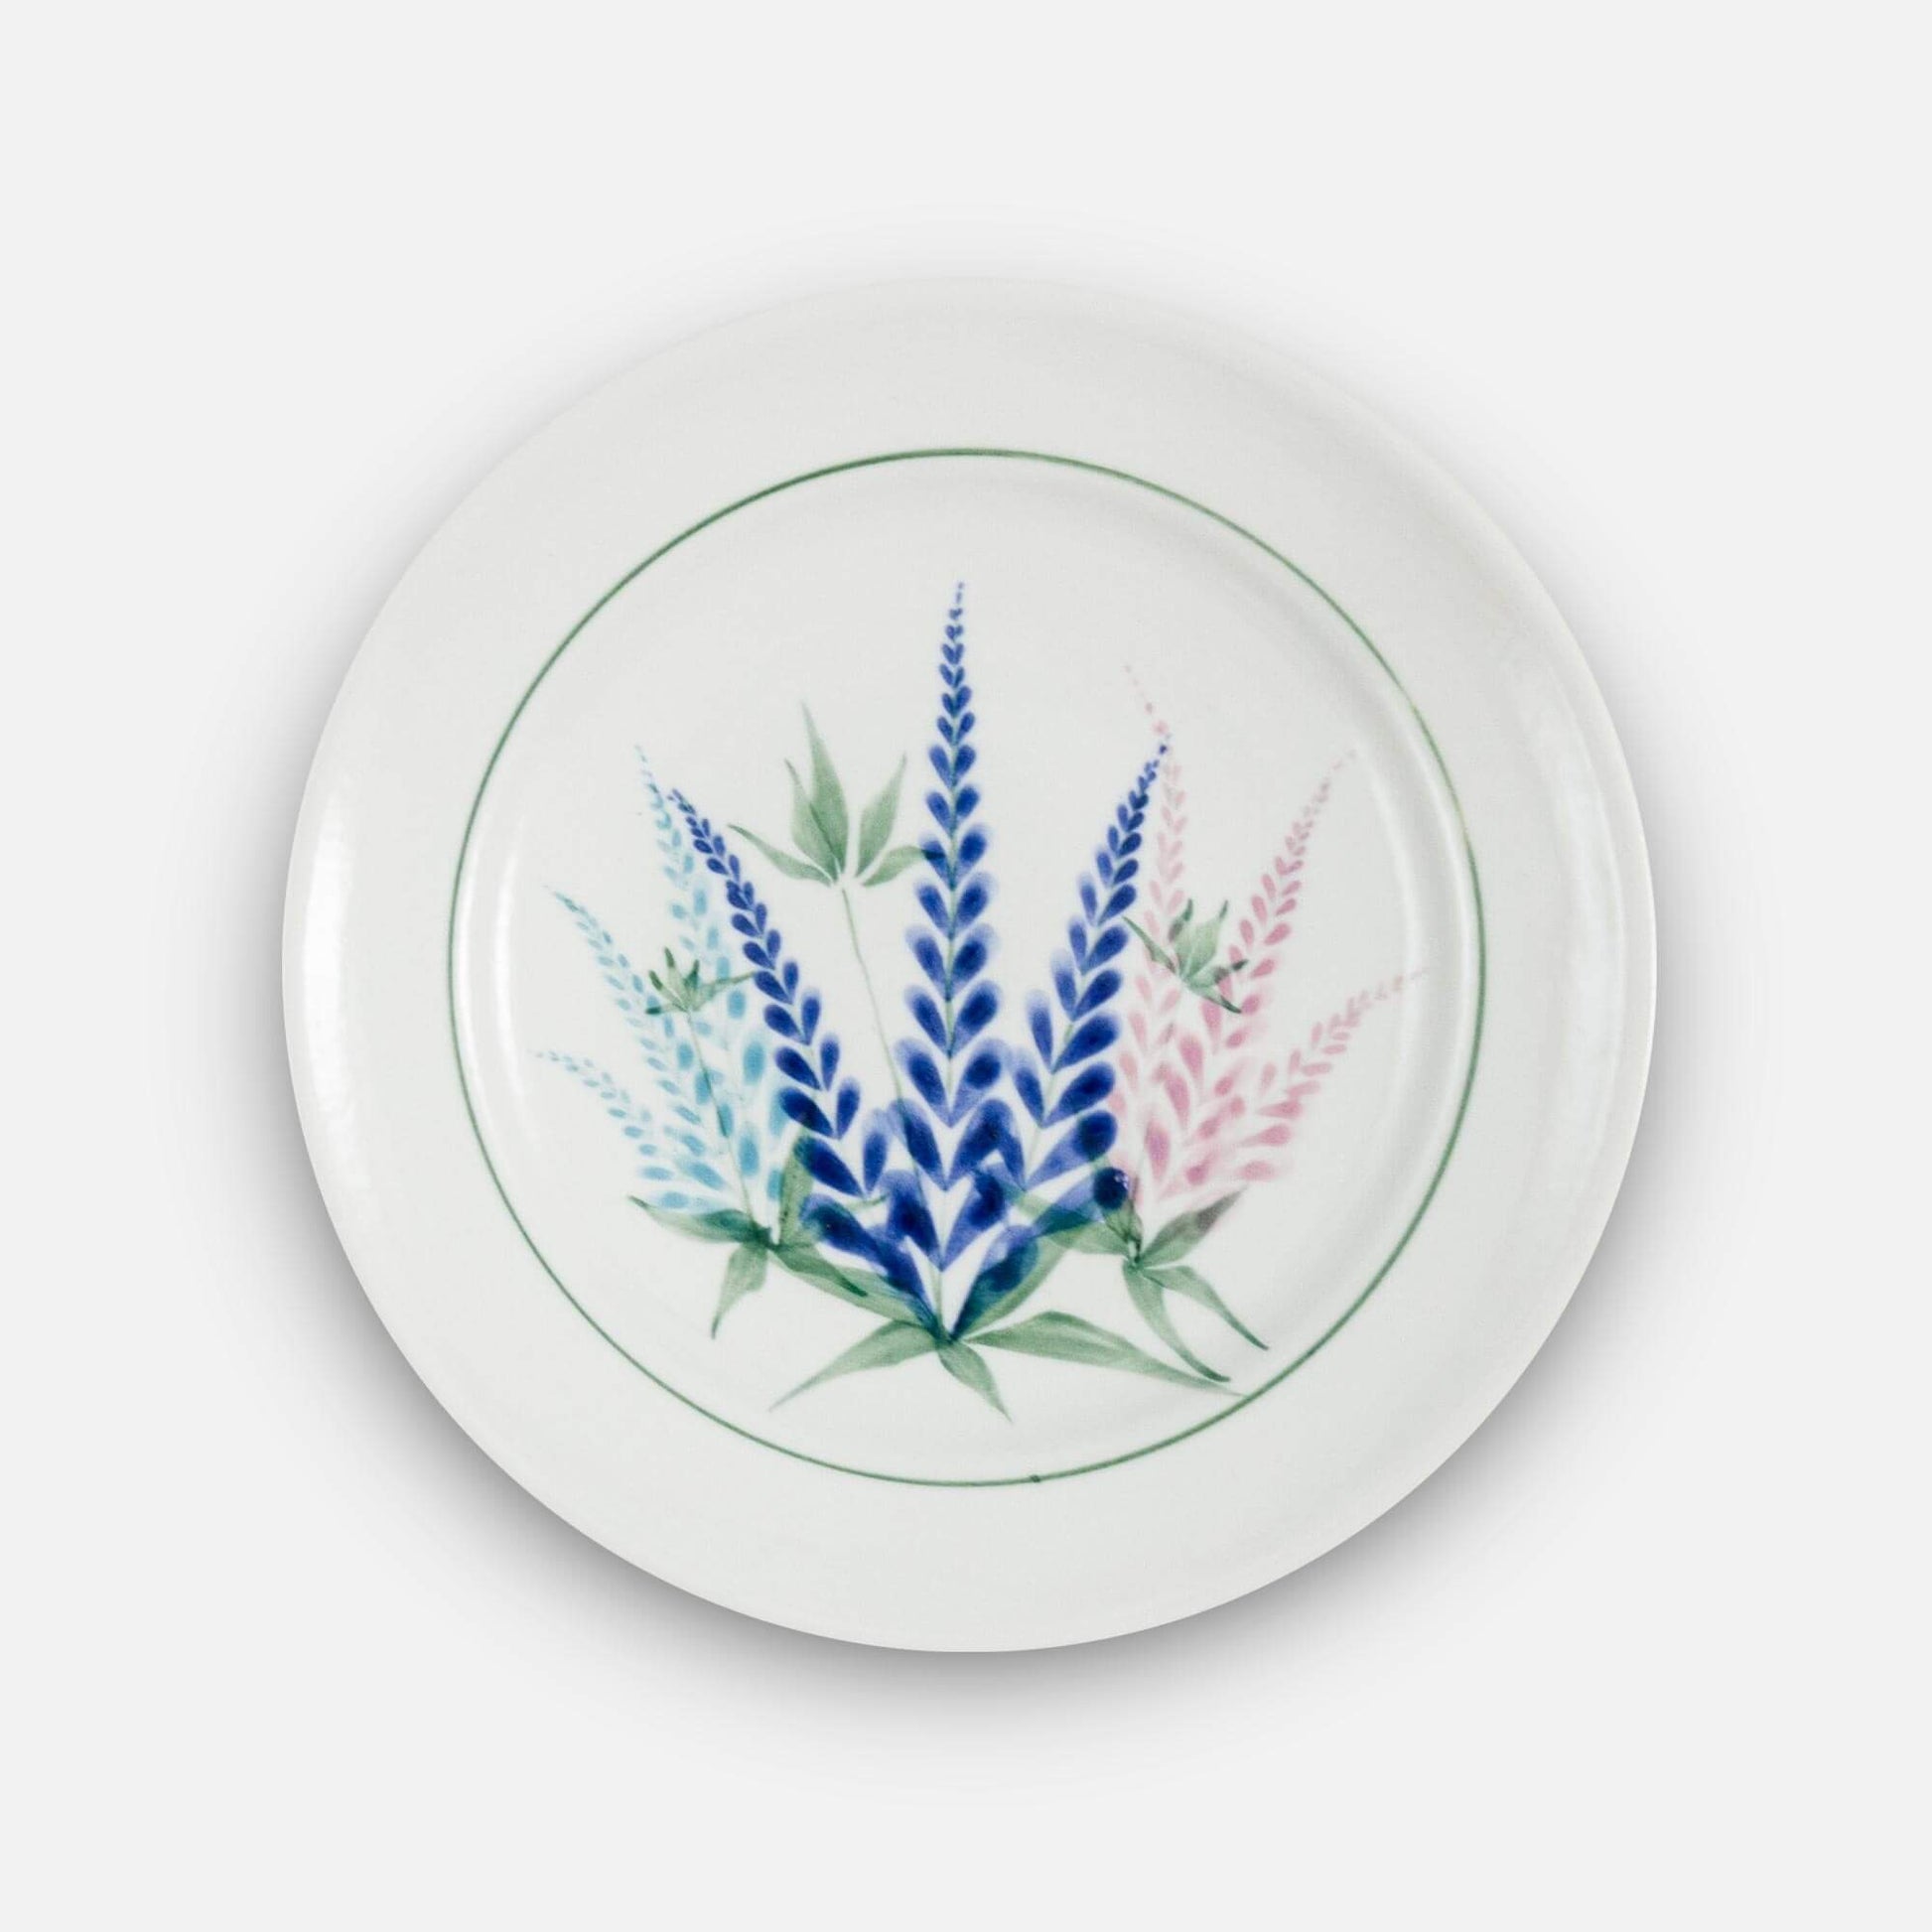 Handmade Pottery Classic Dessert Plate in Lupine pattern made by Georgetown Pottery in Maine